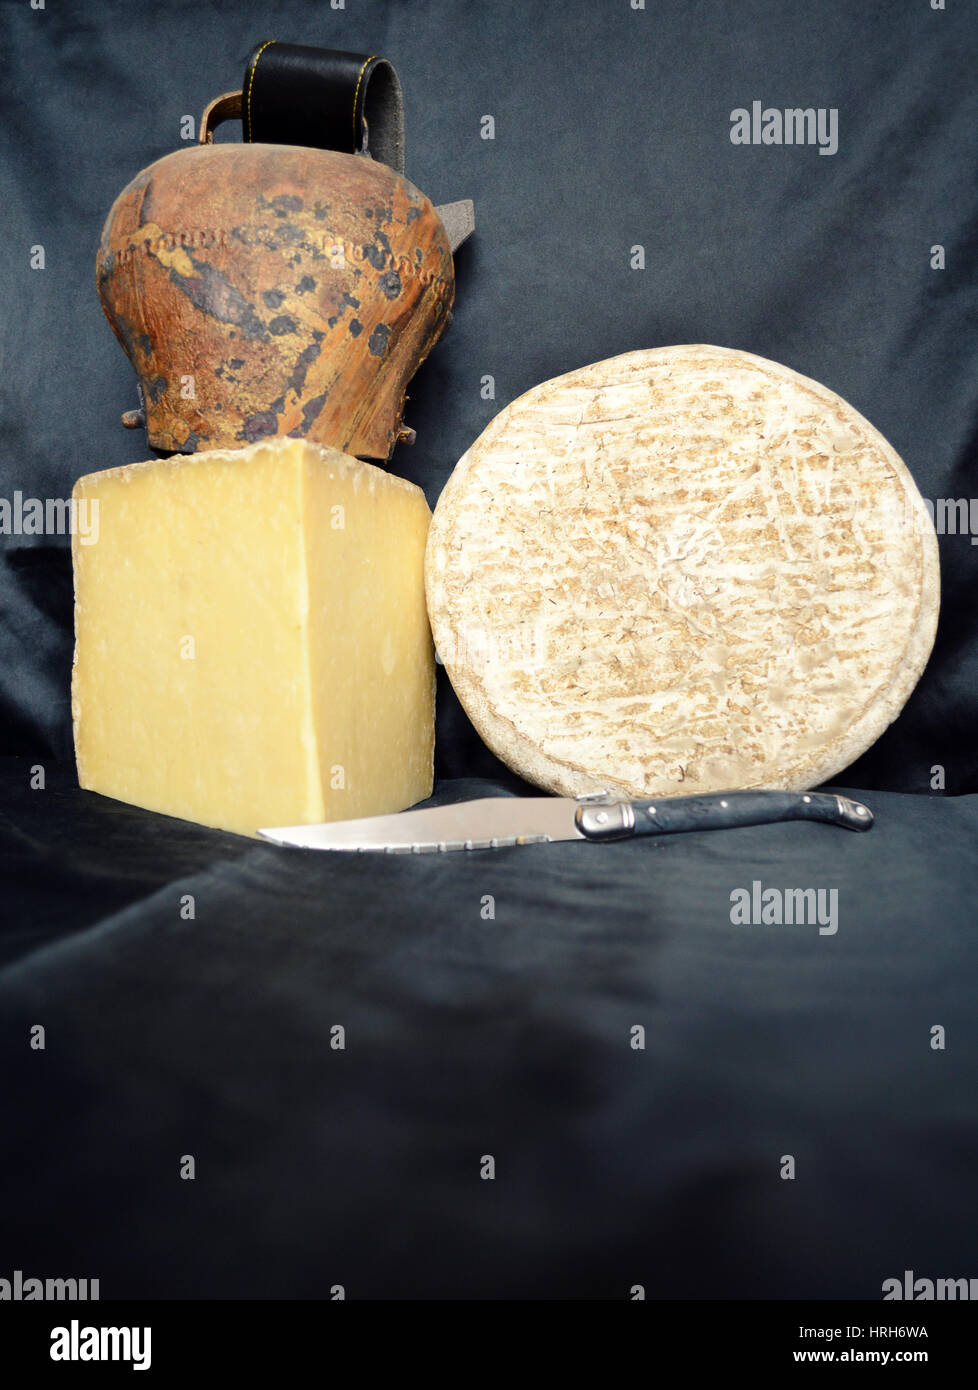 Assortment of Auvergne cheese, France. Stock Photo